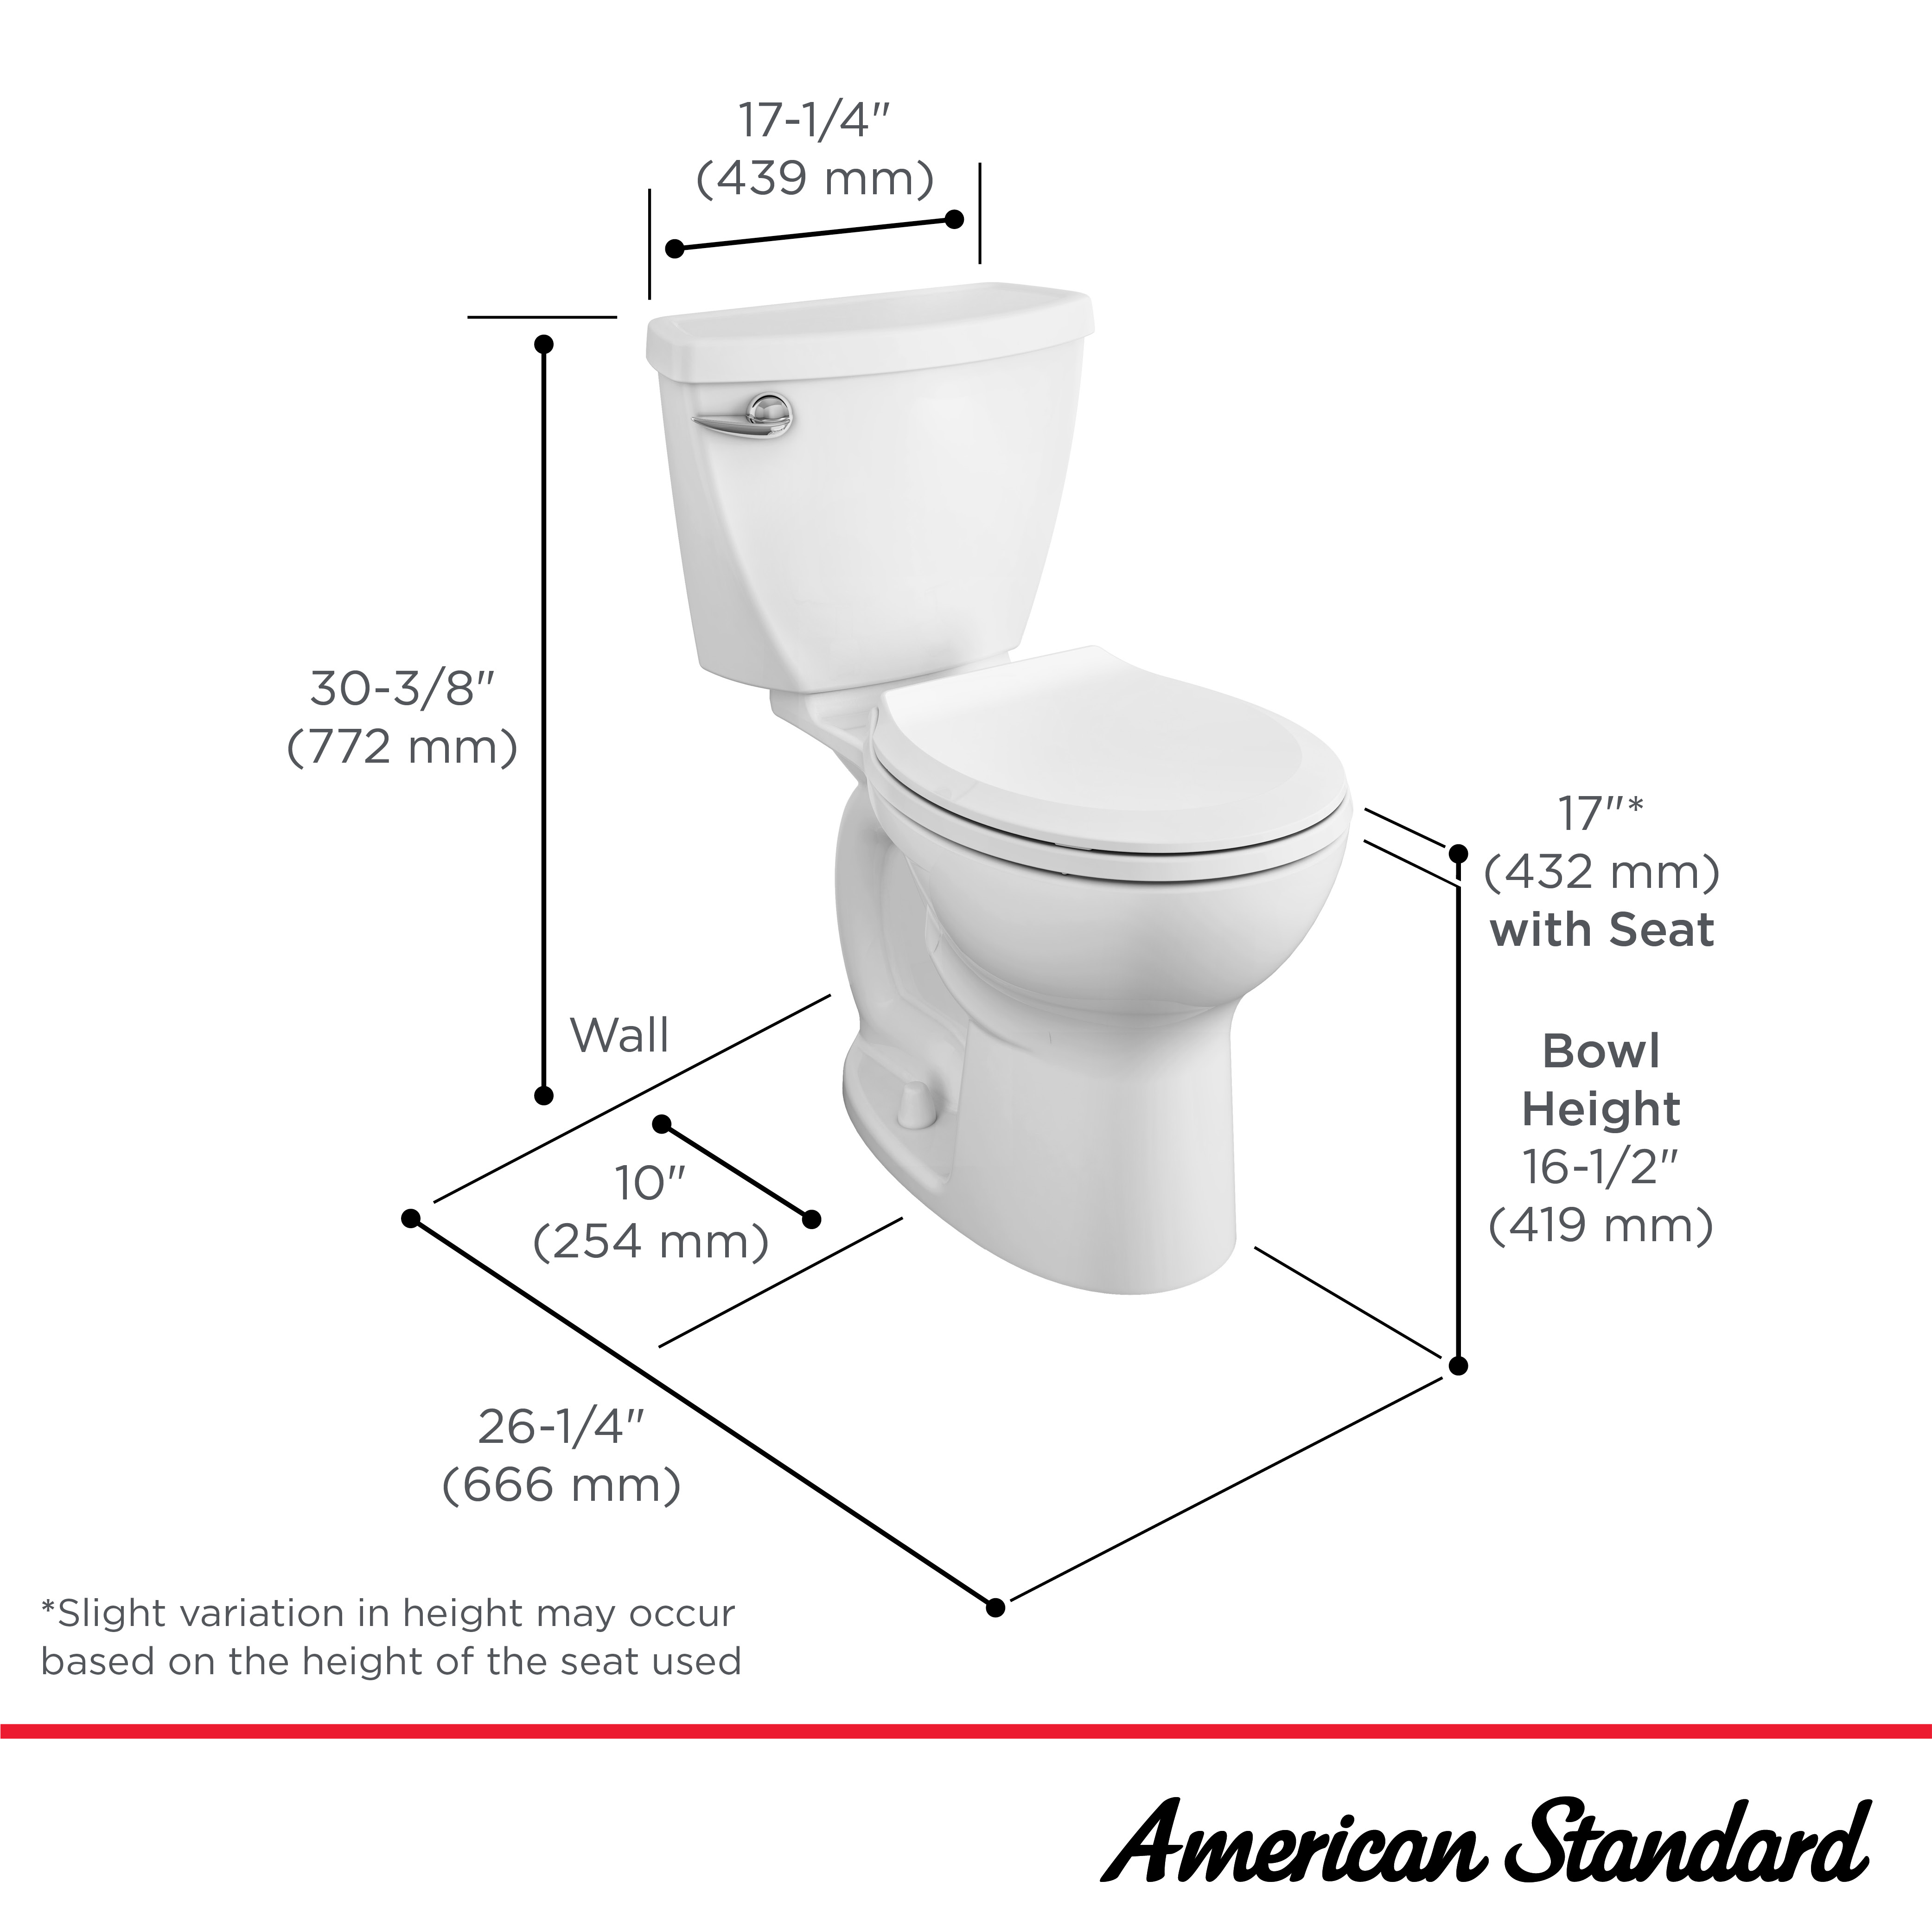 Cadet 3 FloWise 1.28 GPF/4.8 LPF Left Trip Lever 16/1-2-in. Round-Front Toilet with Slow-Close Seat